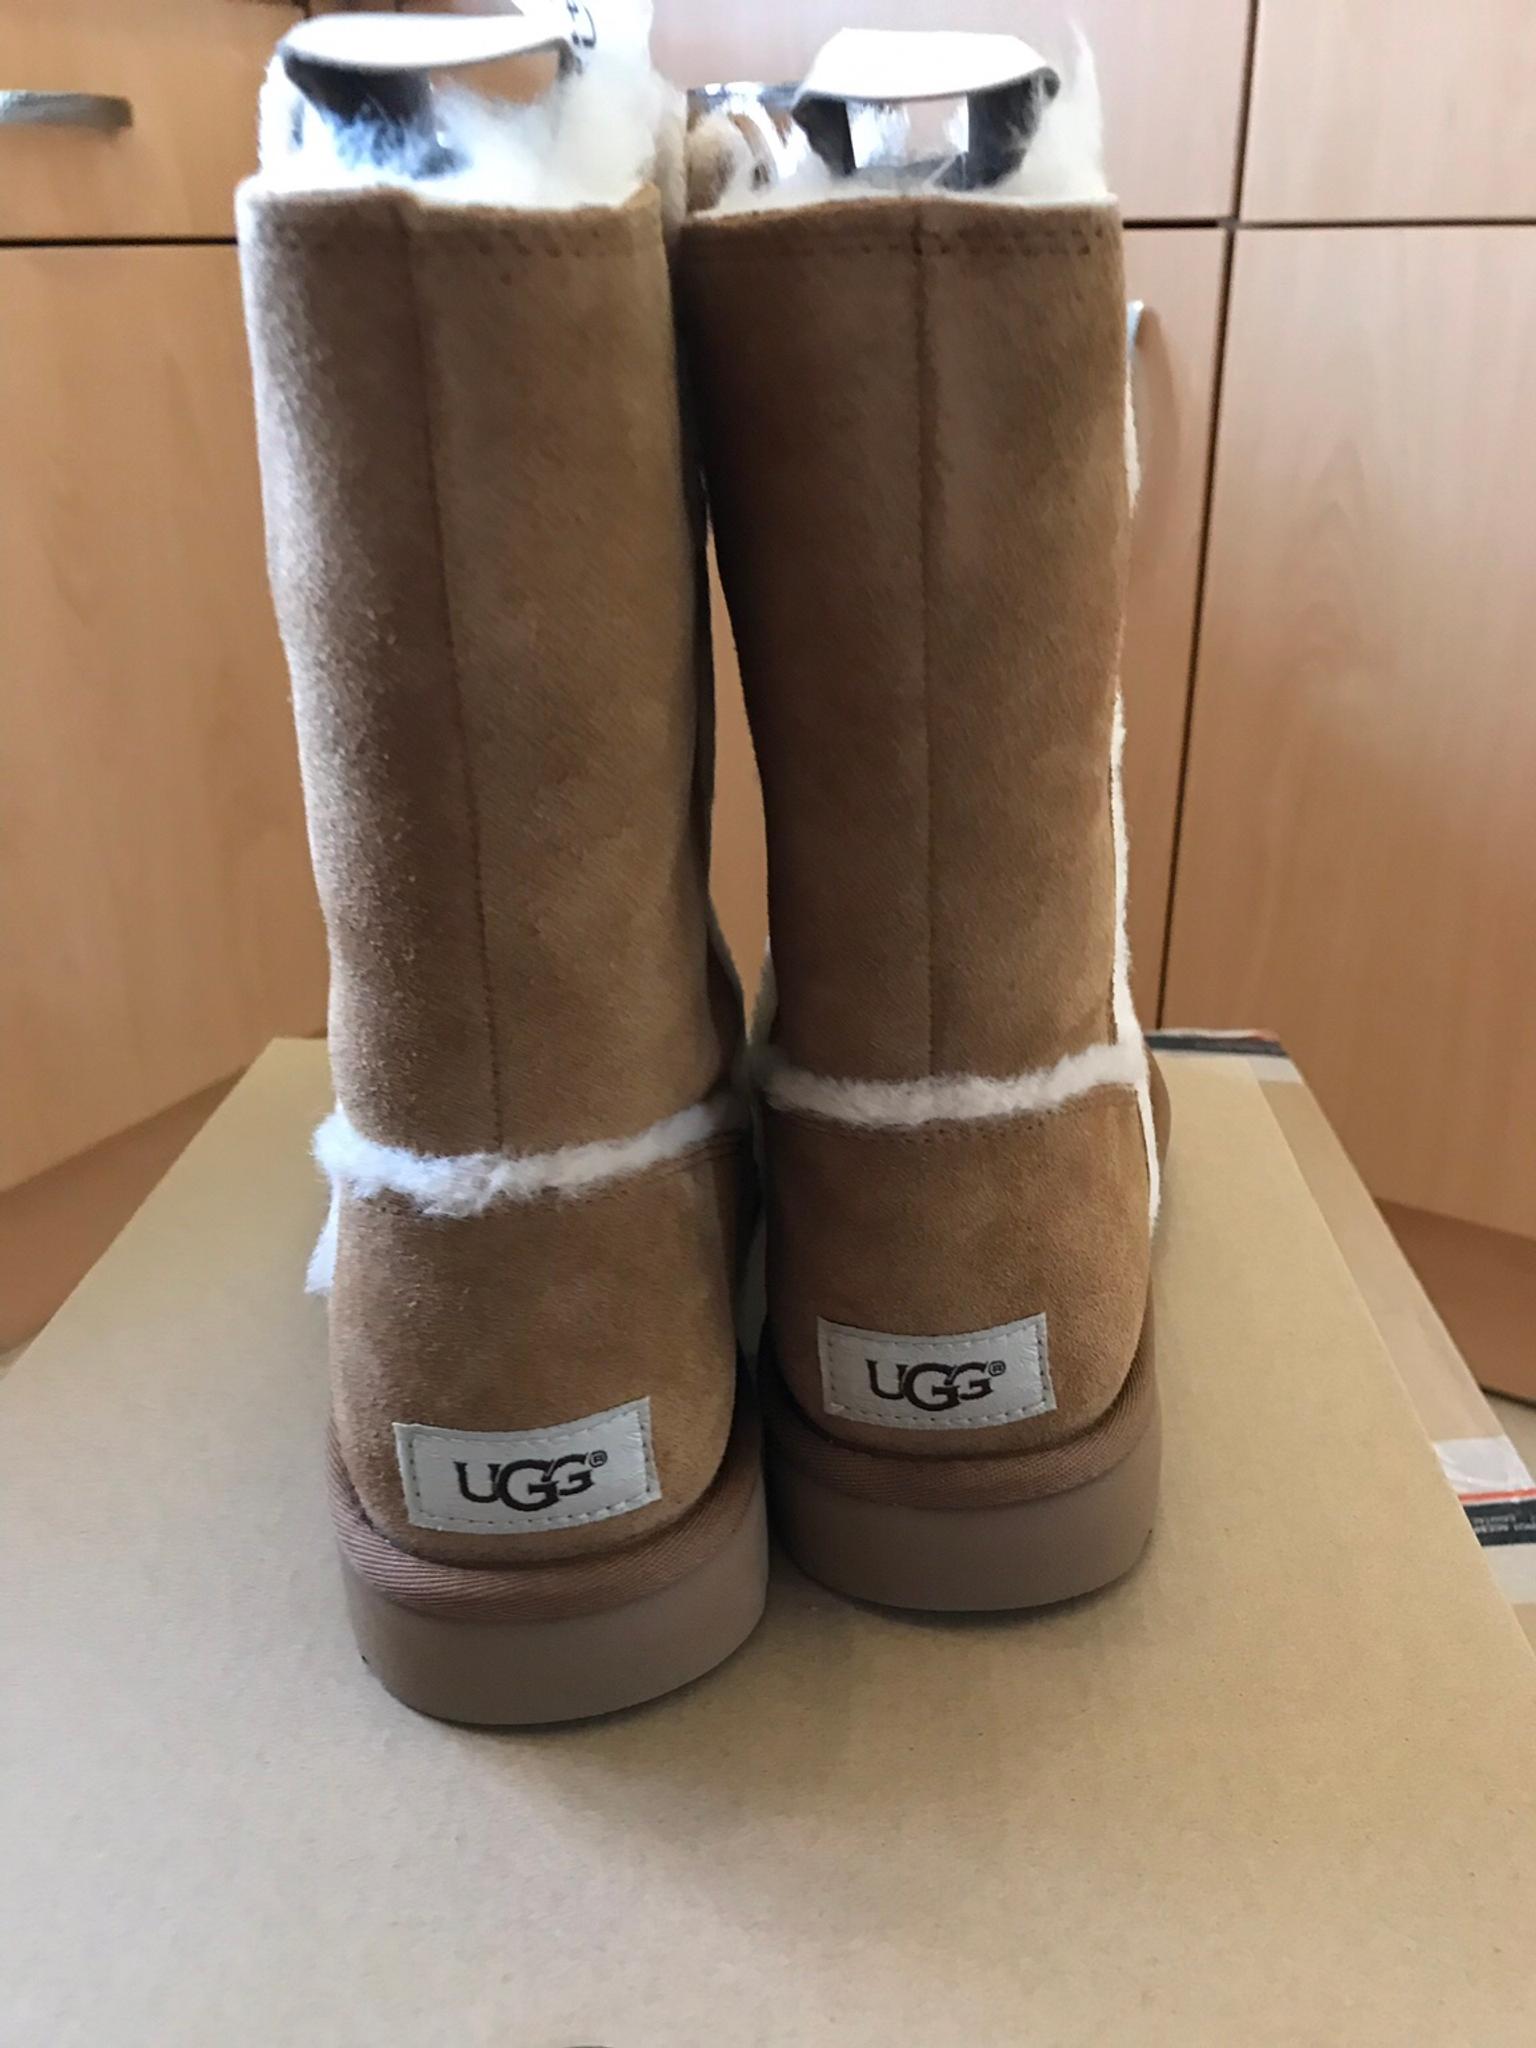 cheapest ugg boots uk